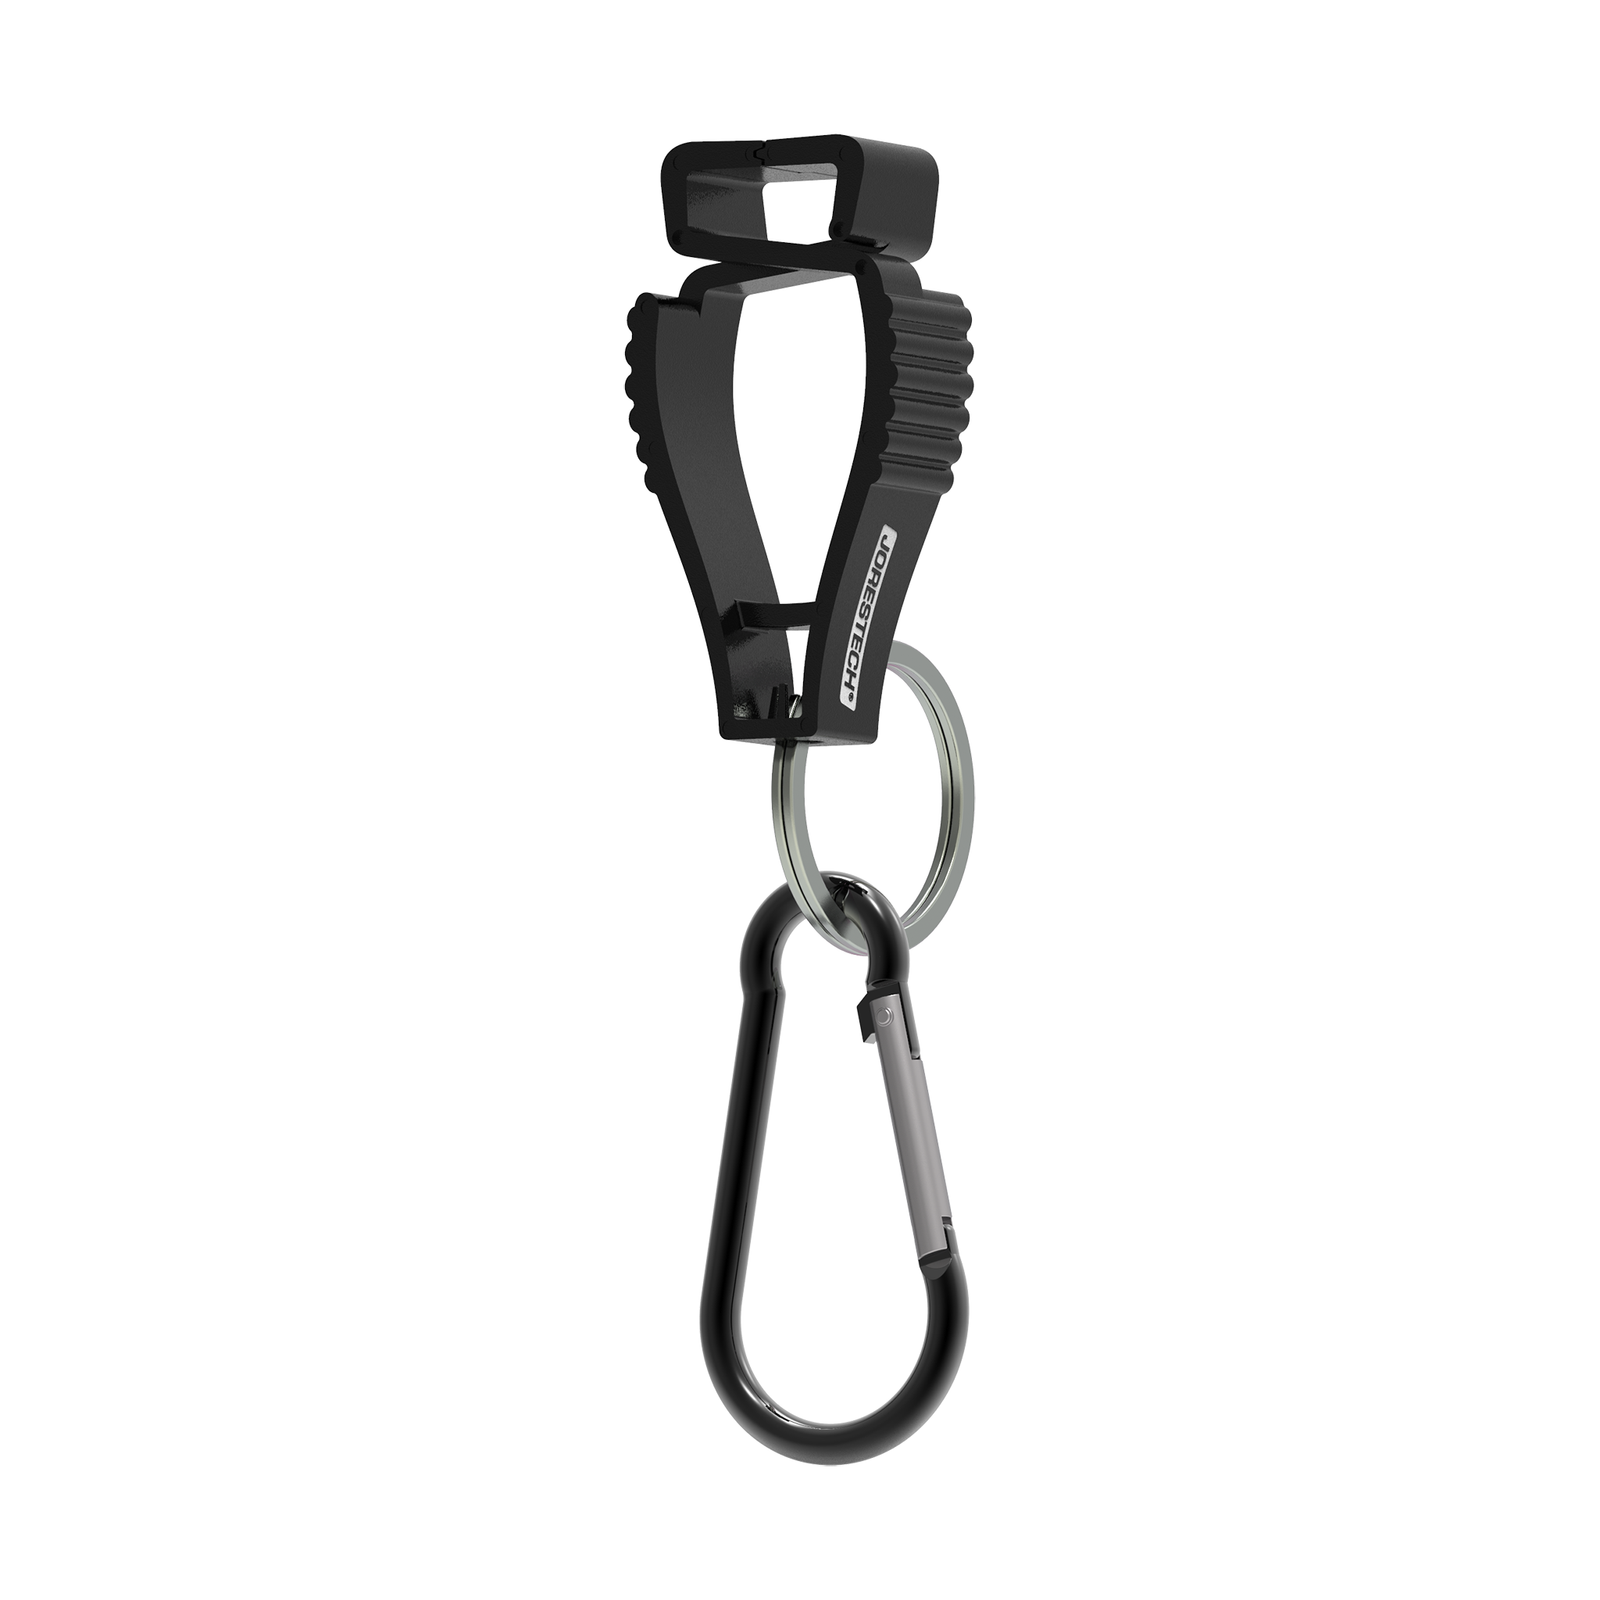 Black JORESTECH glove clip safety holders with carabiner